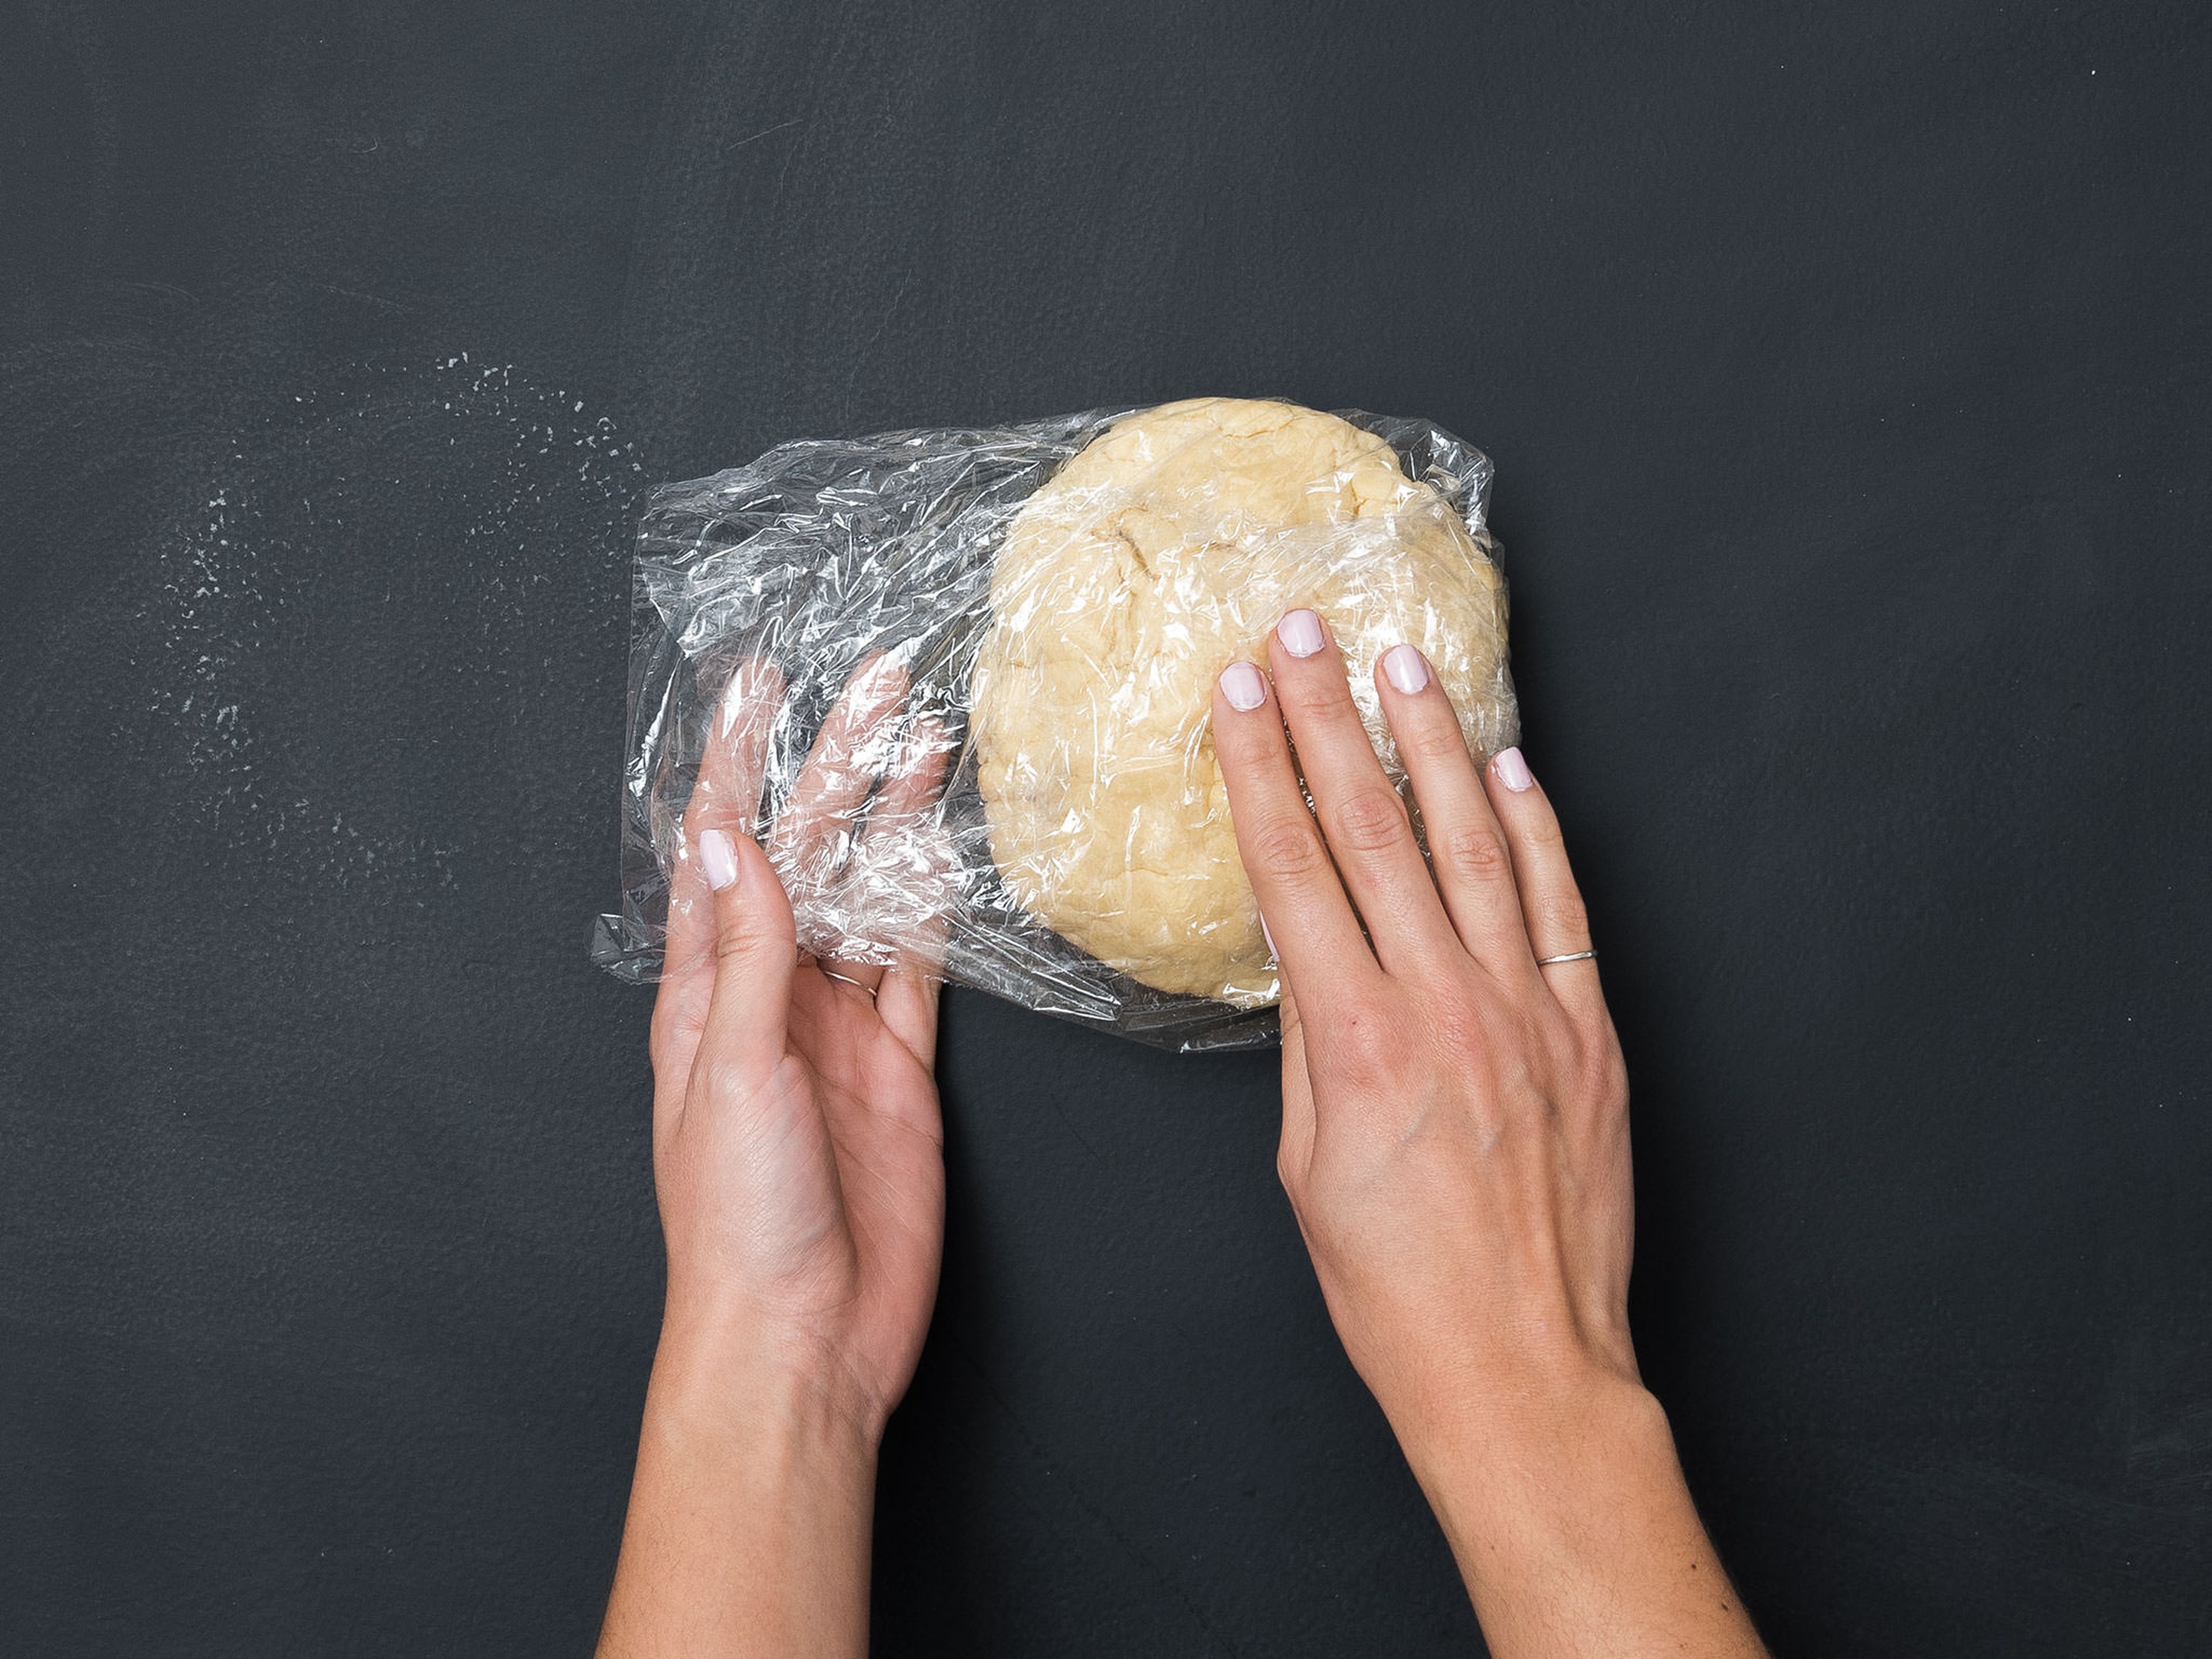 For the white dough, mix some of the cold margarine, confectioner’s sugar, vanilla sugar, and water. Add flour and knead thoroughly. If needed, add a bit more water. Wrap in plastic and transfer for approx. 10 min. to the refrigerator.